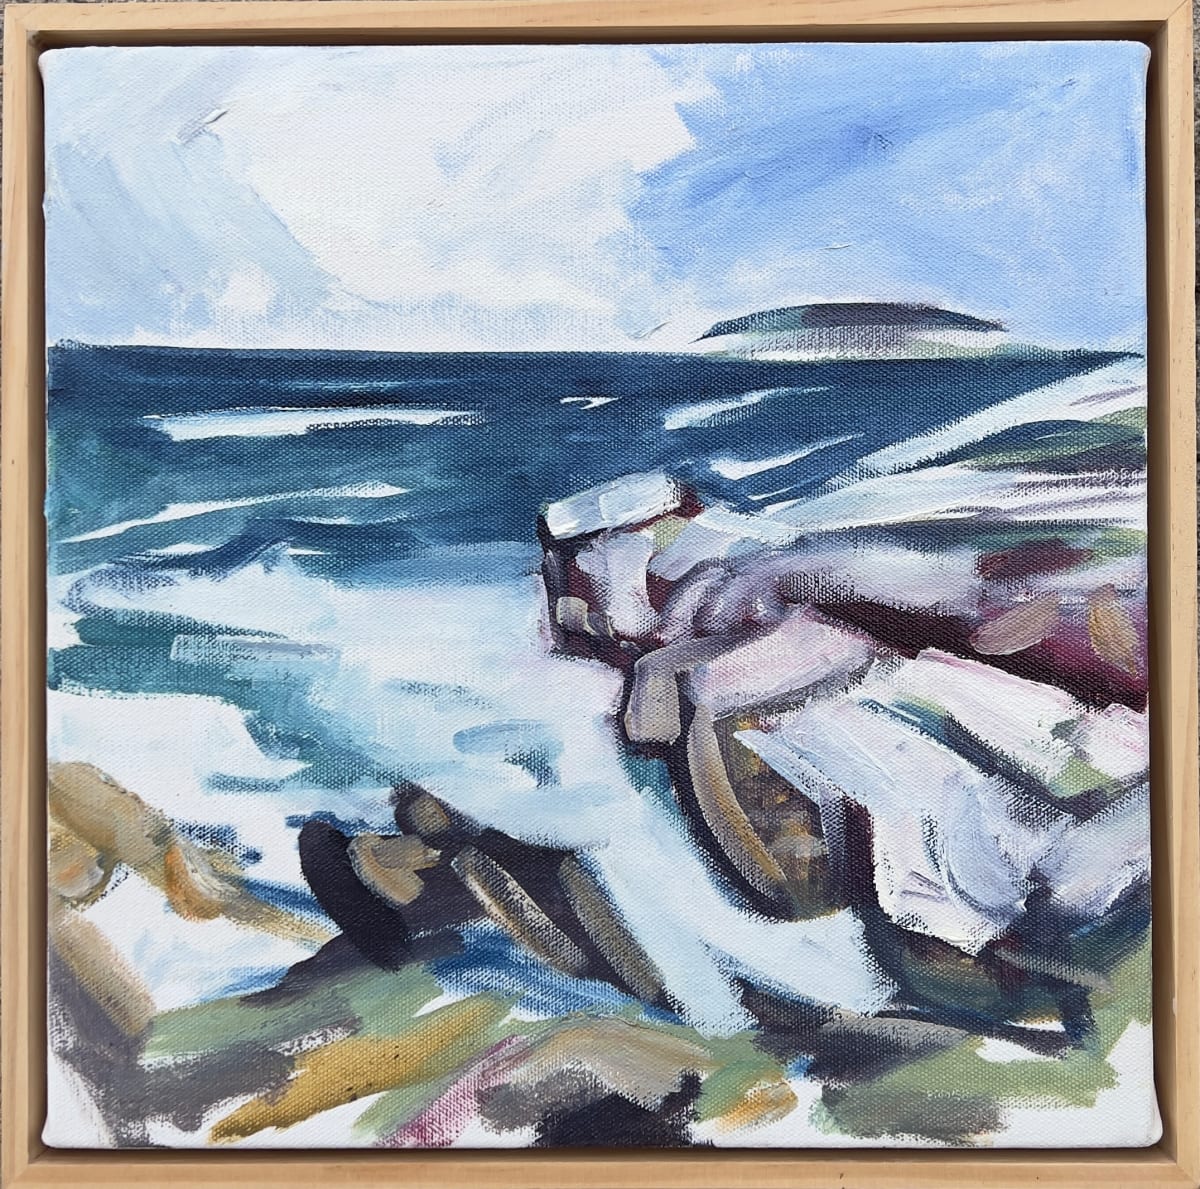 Whalers Way by Vicki Bosisto  Image: In the dance between sea and stone, nature's raw power is unveiled. The relentless force of the ocean as it crashes against the steadfast rocky coast is a timeless symphony of strength and resilience.